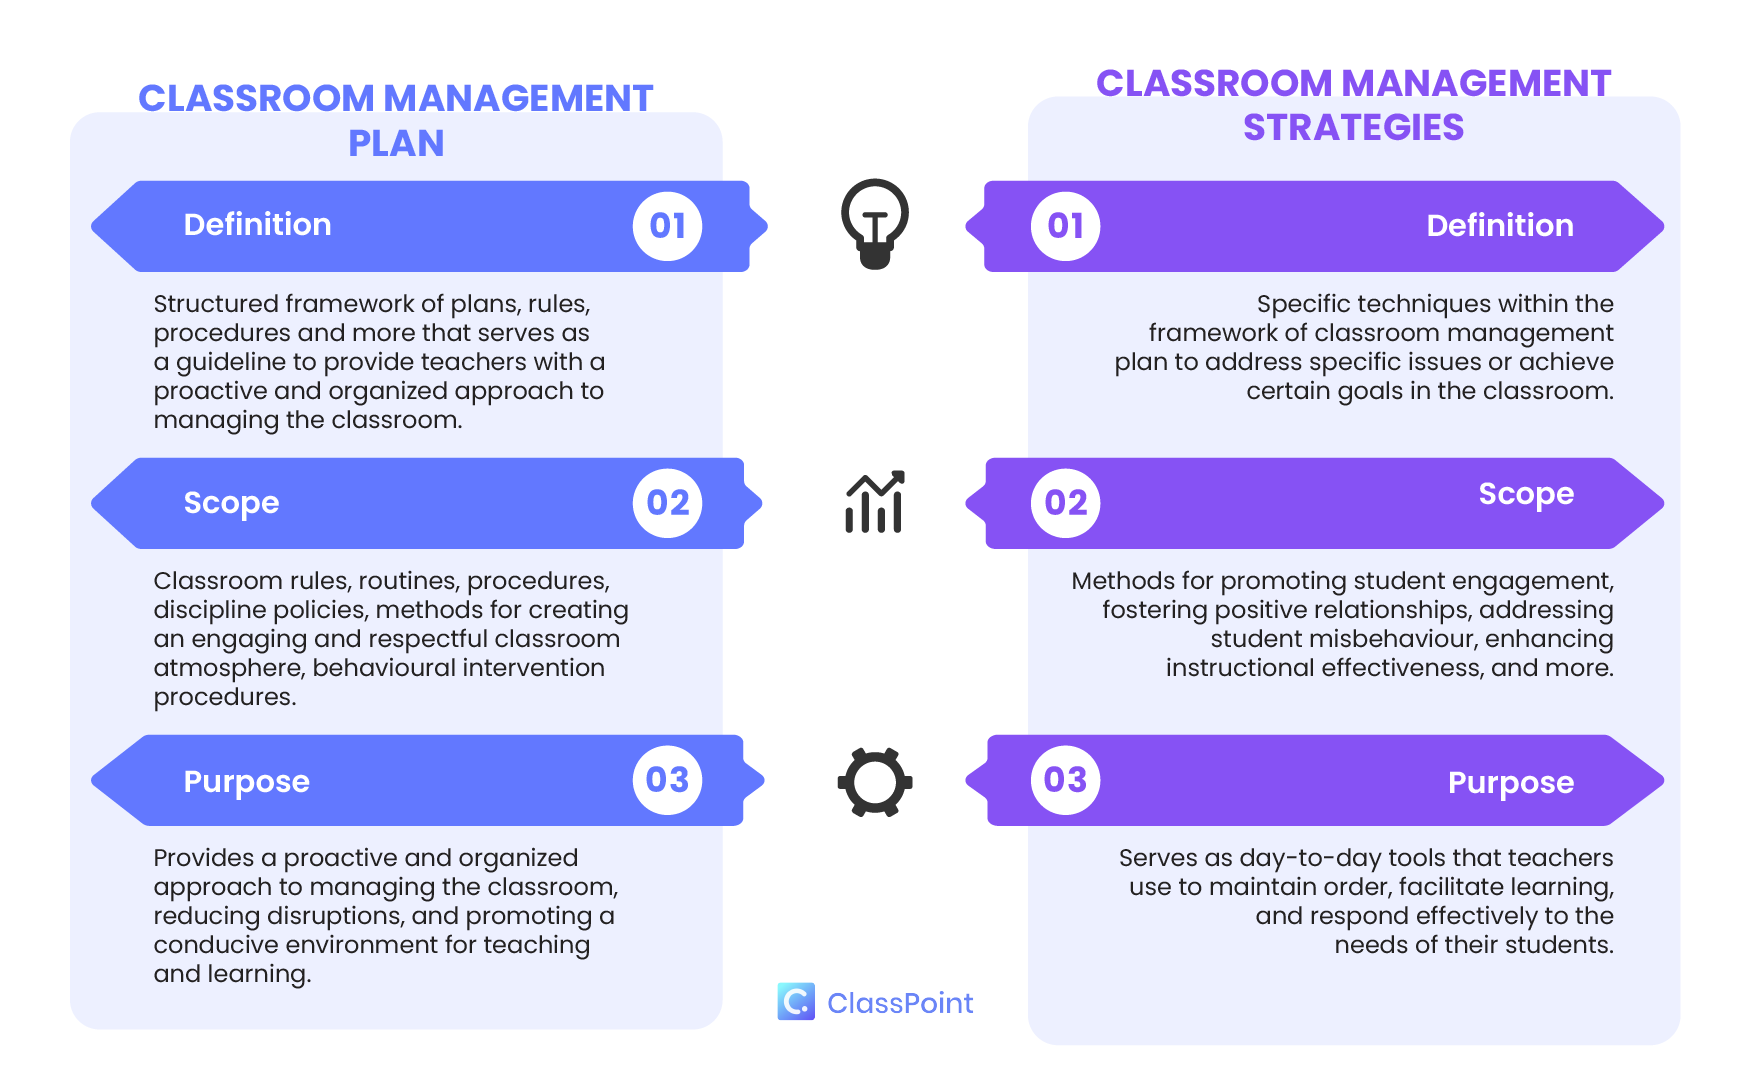 Differences between Classroom Management Plan and Classroom Management Strategies